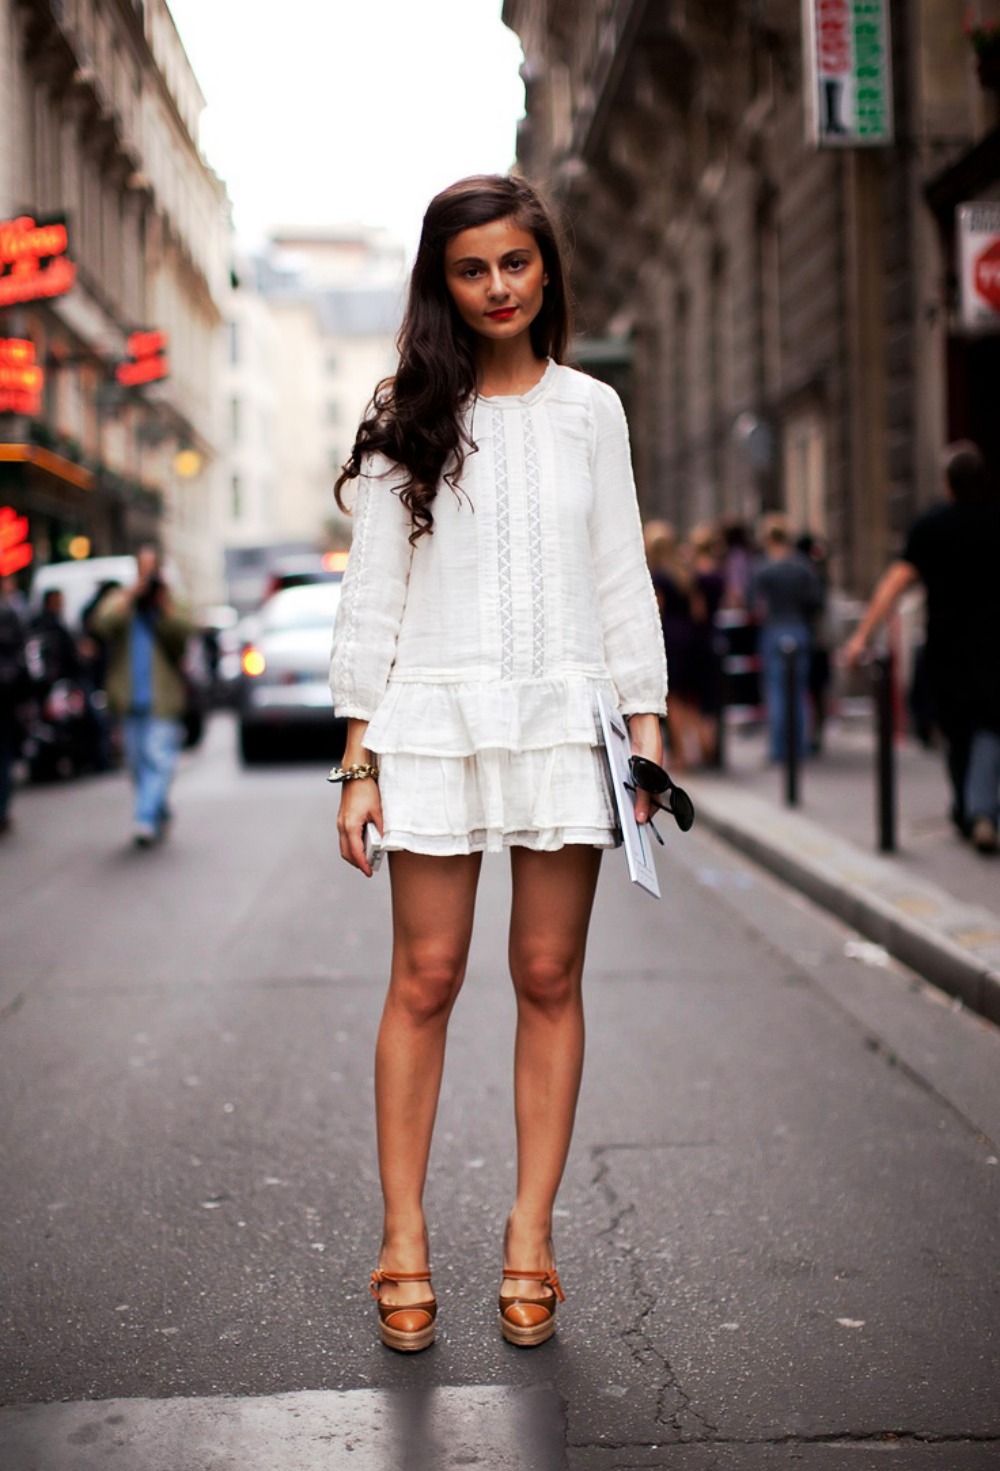 30 Stylish Women Outfits That Makes You Fashionista